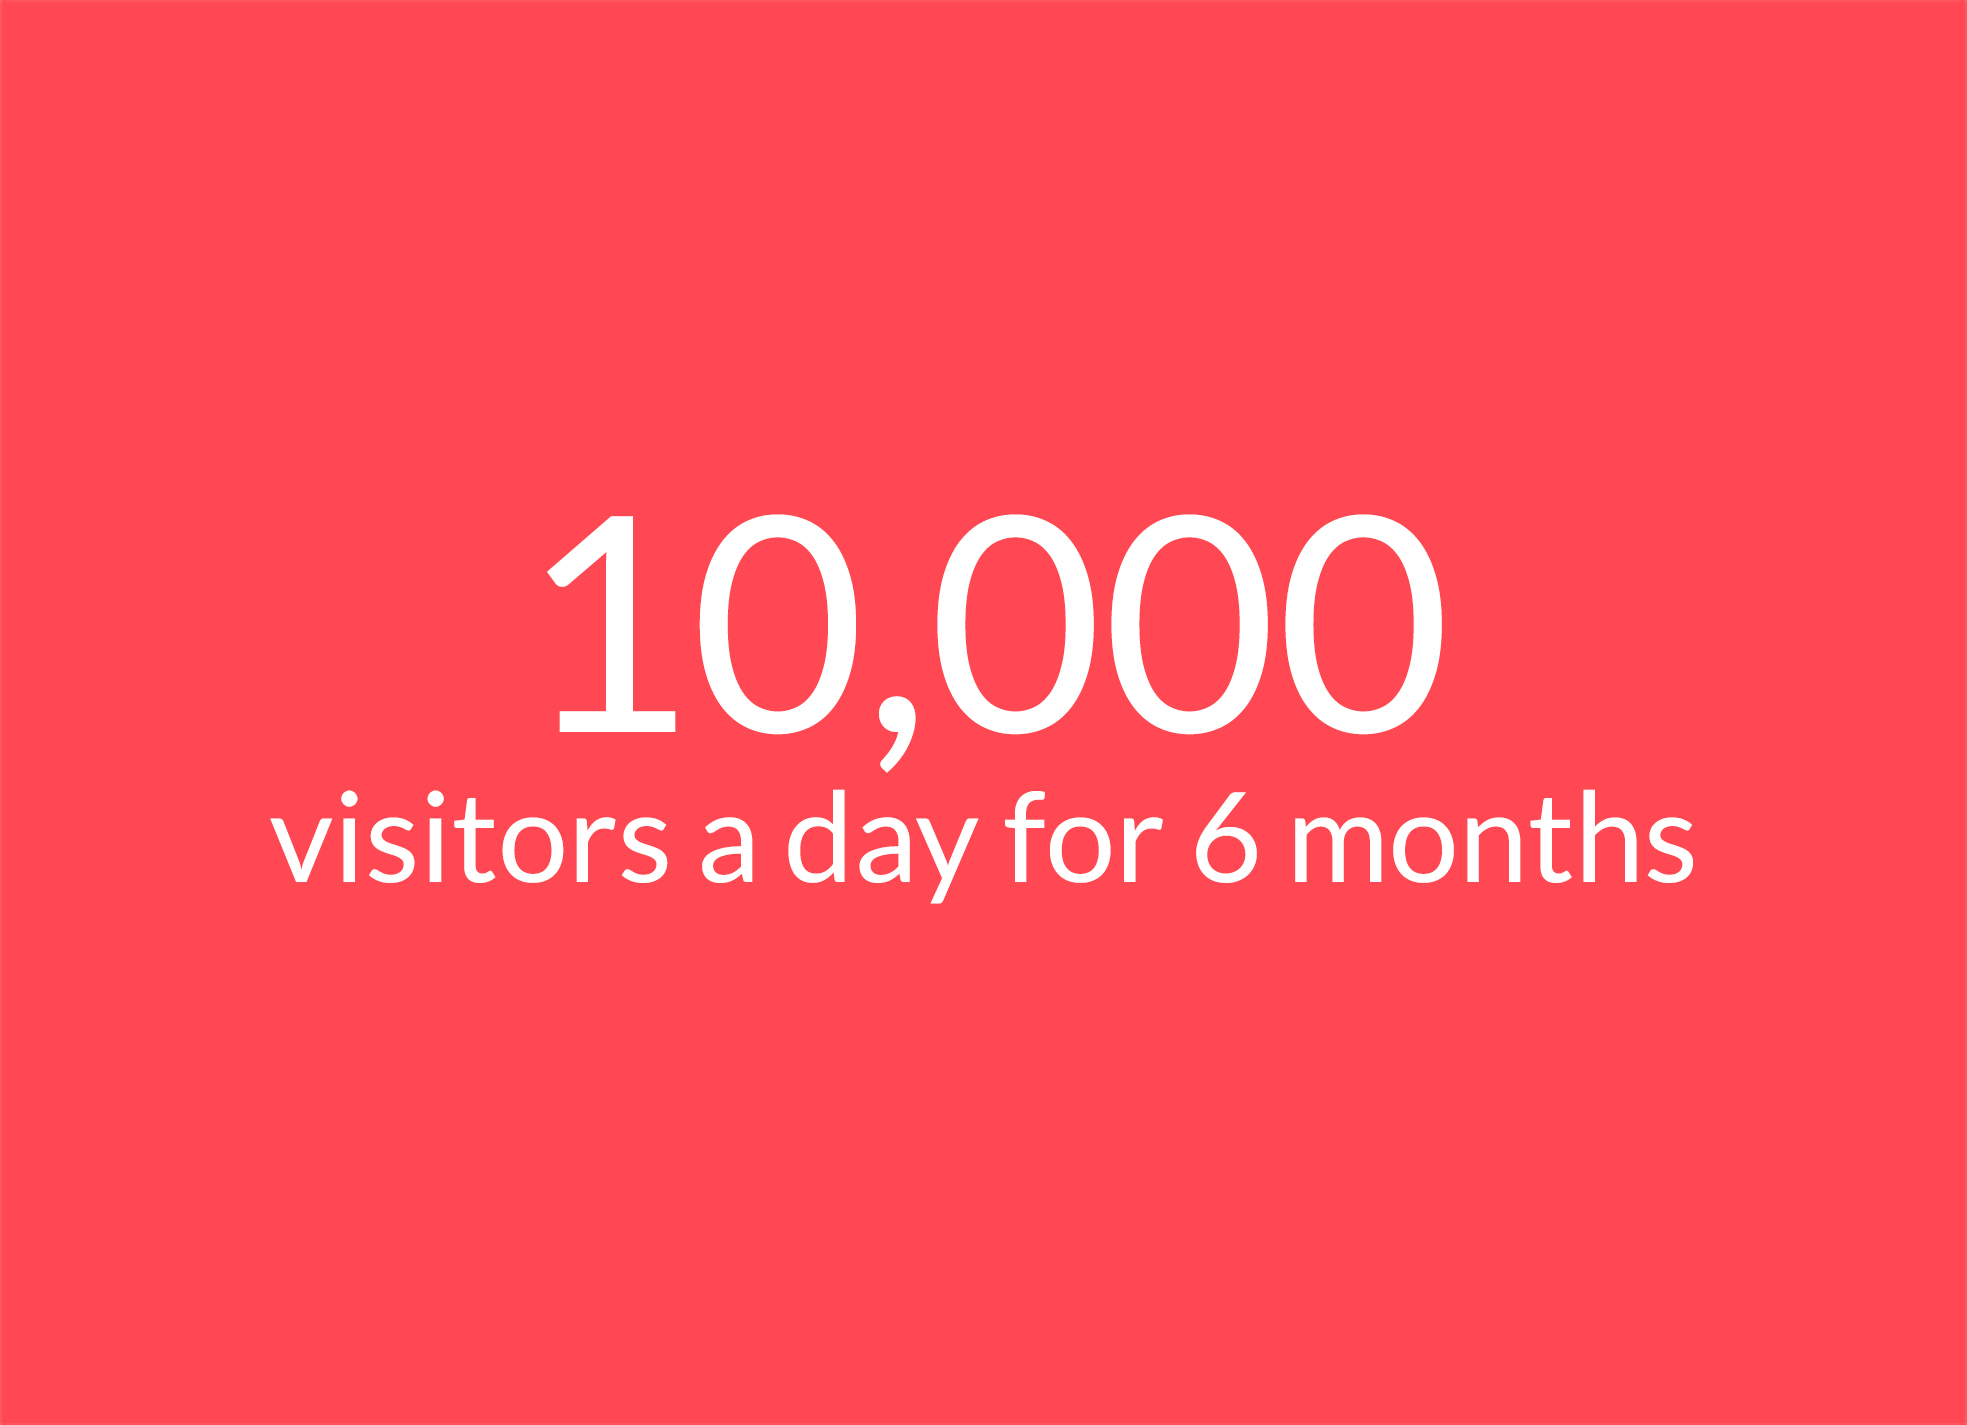 Text: 10,000 visitors a day for 6 months